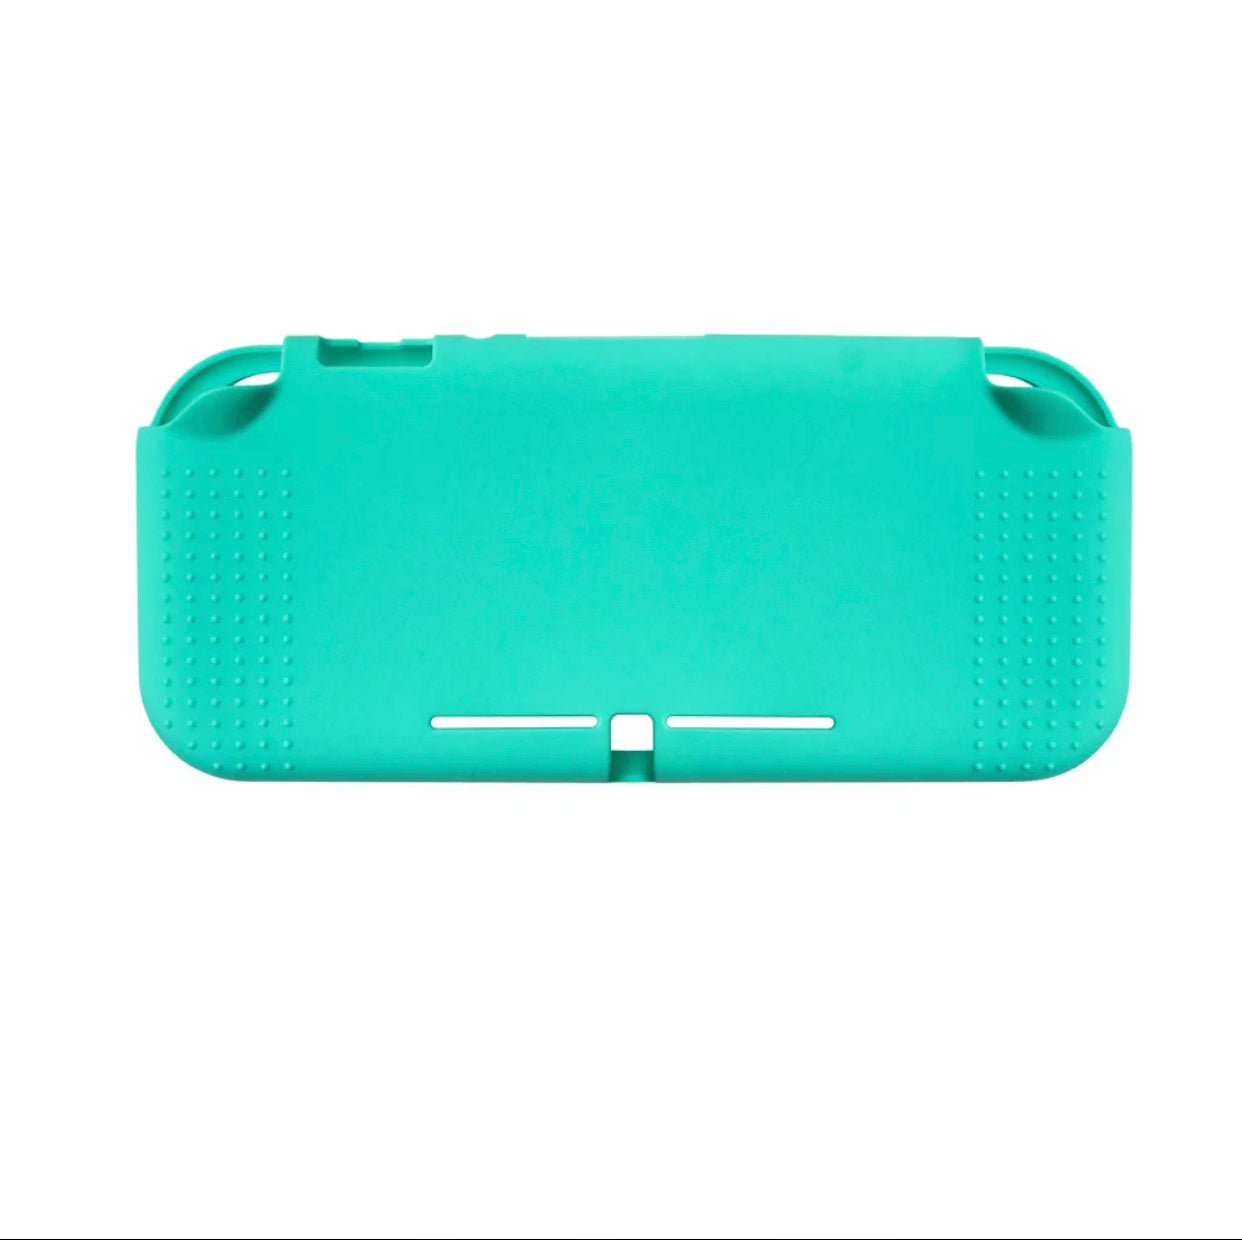 JenDore Nintendo Switch Lite Teal Silicone Protective Shell Cover Case